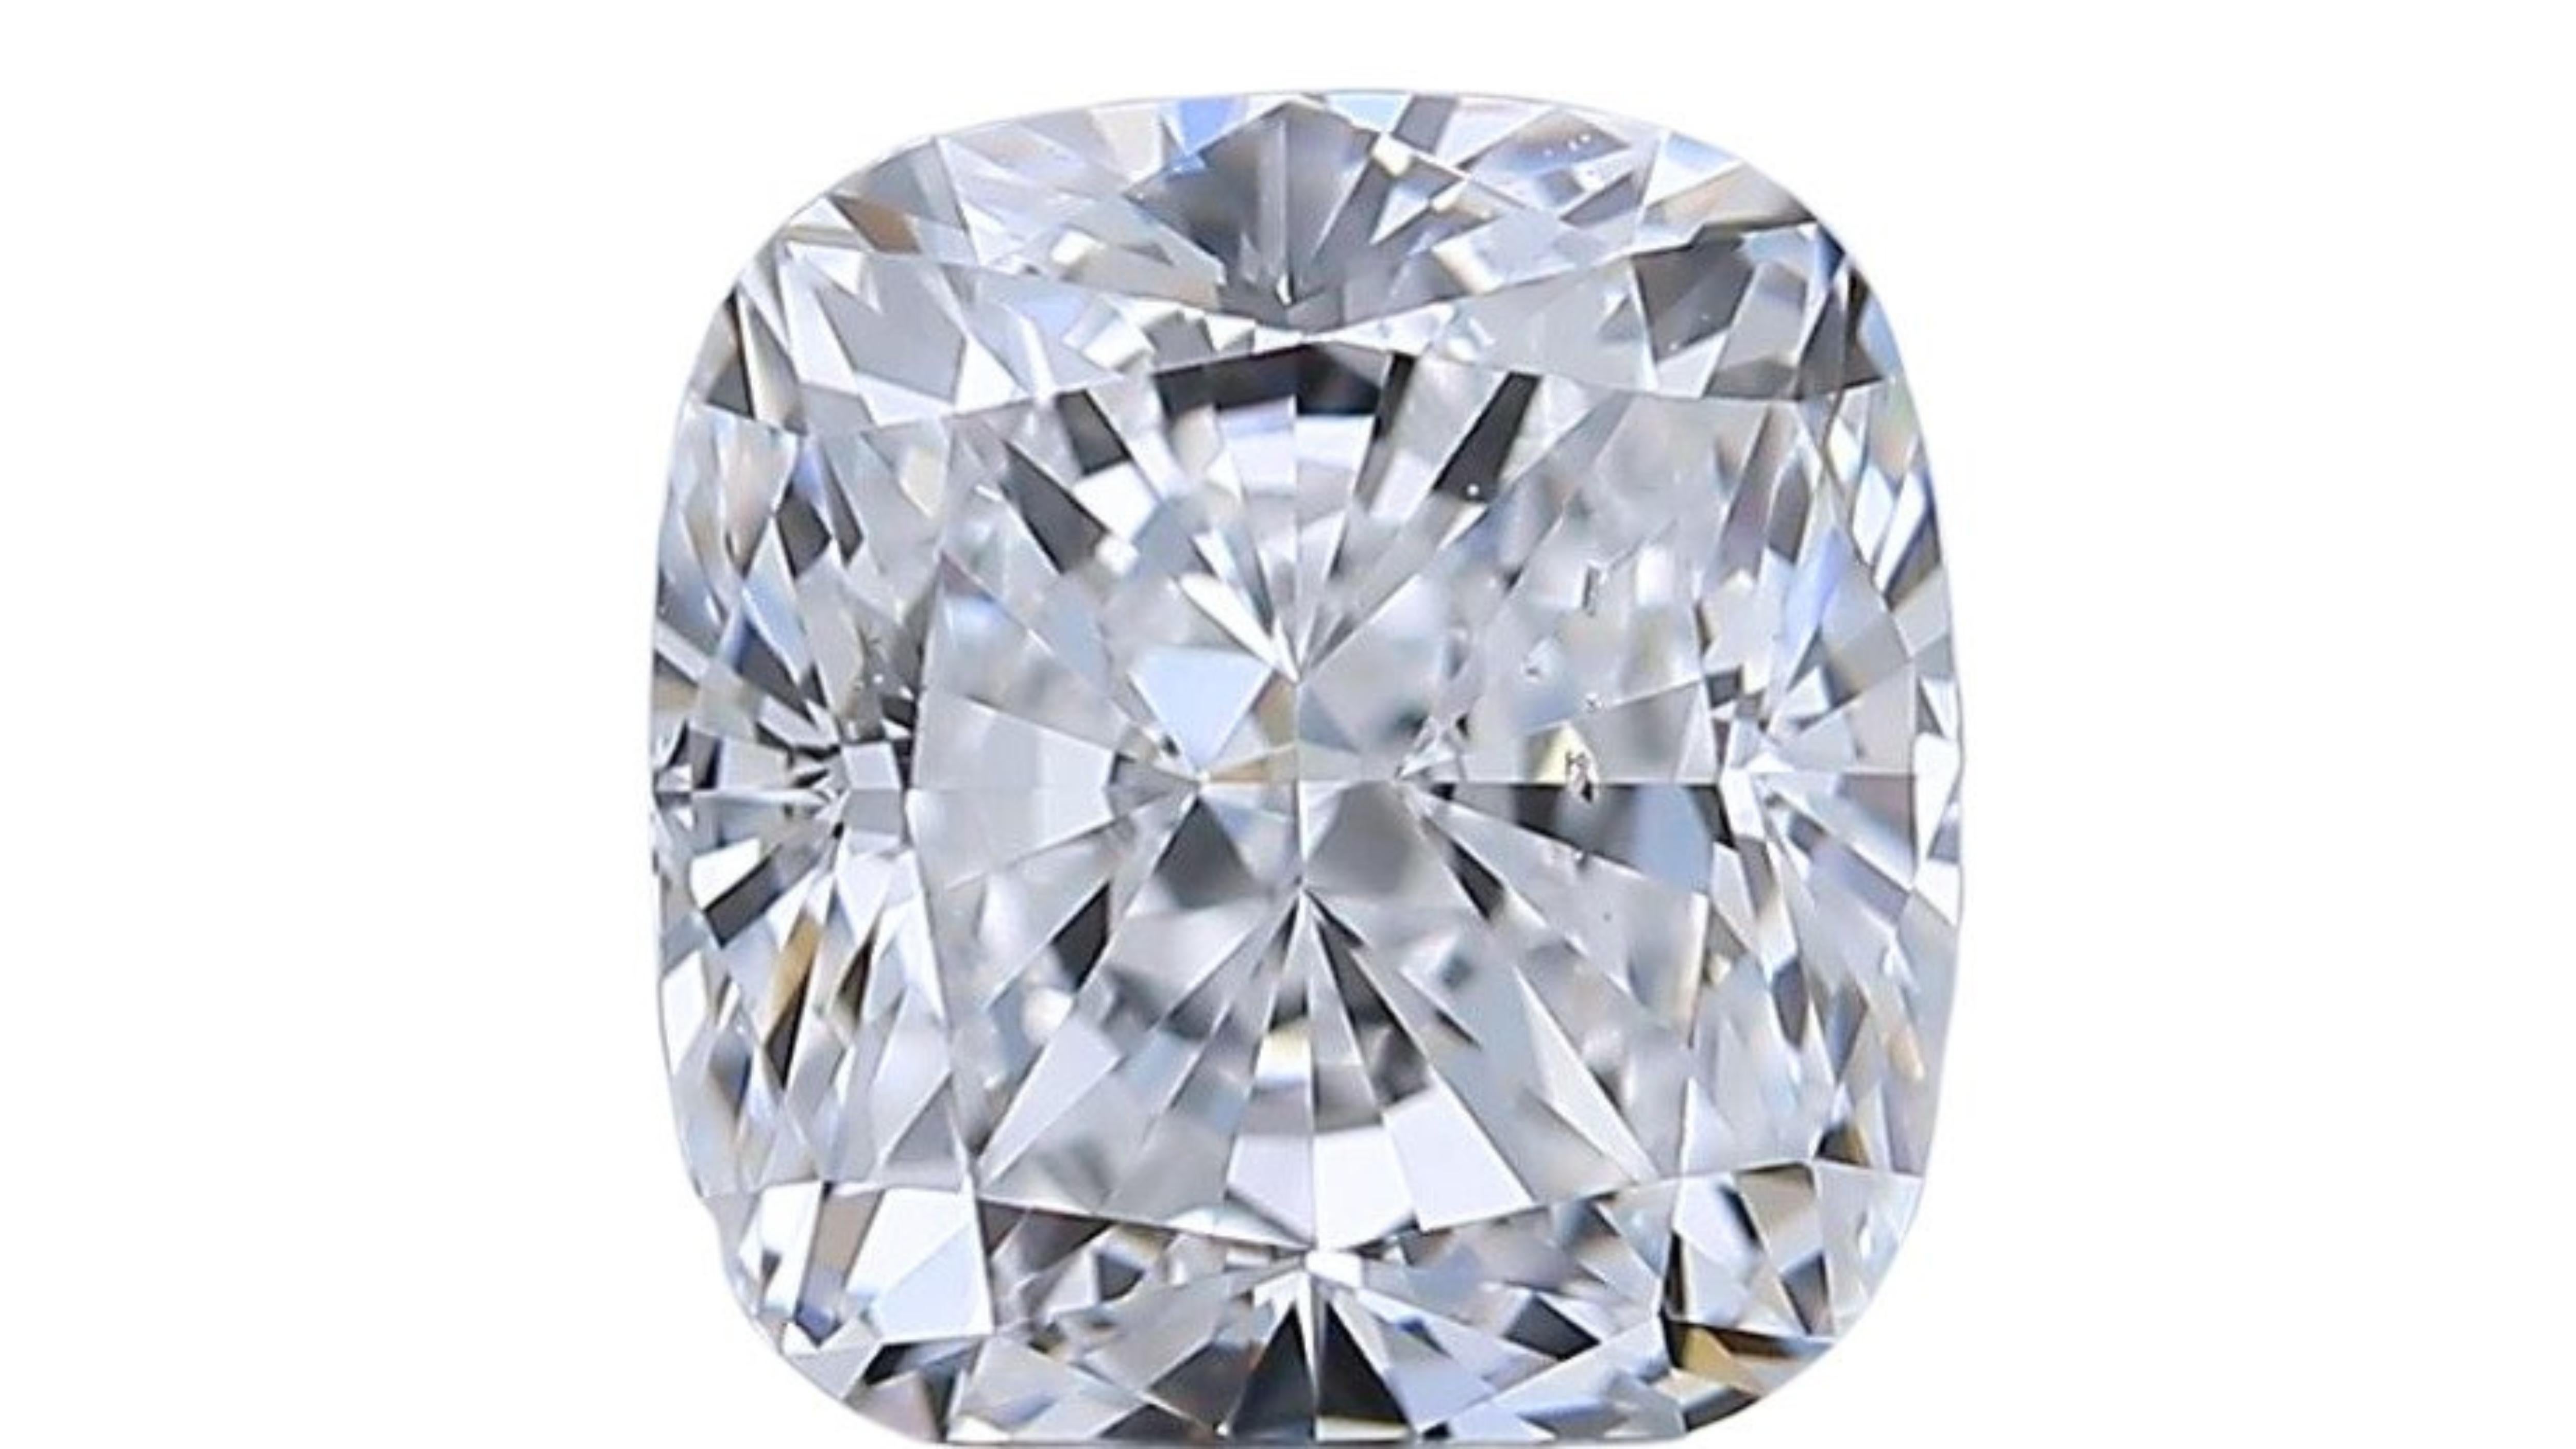 Women's Sparkling Cushion Modified Brilliant Cut Natural Diamond in a 1.01 Carat For Sale